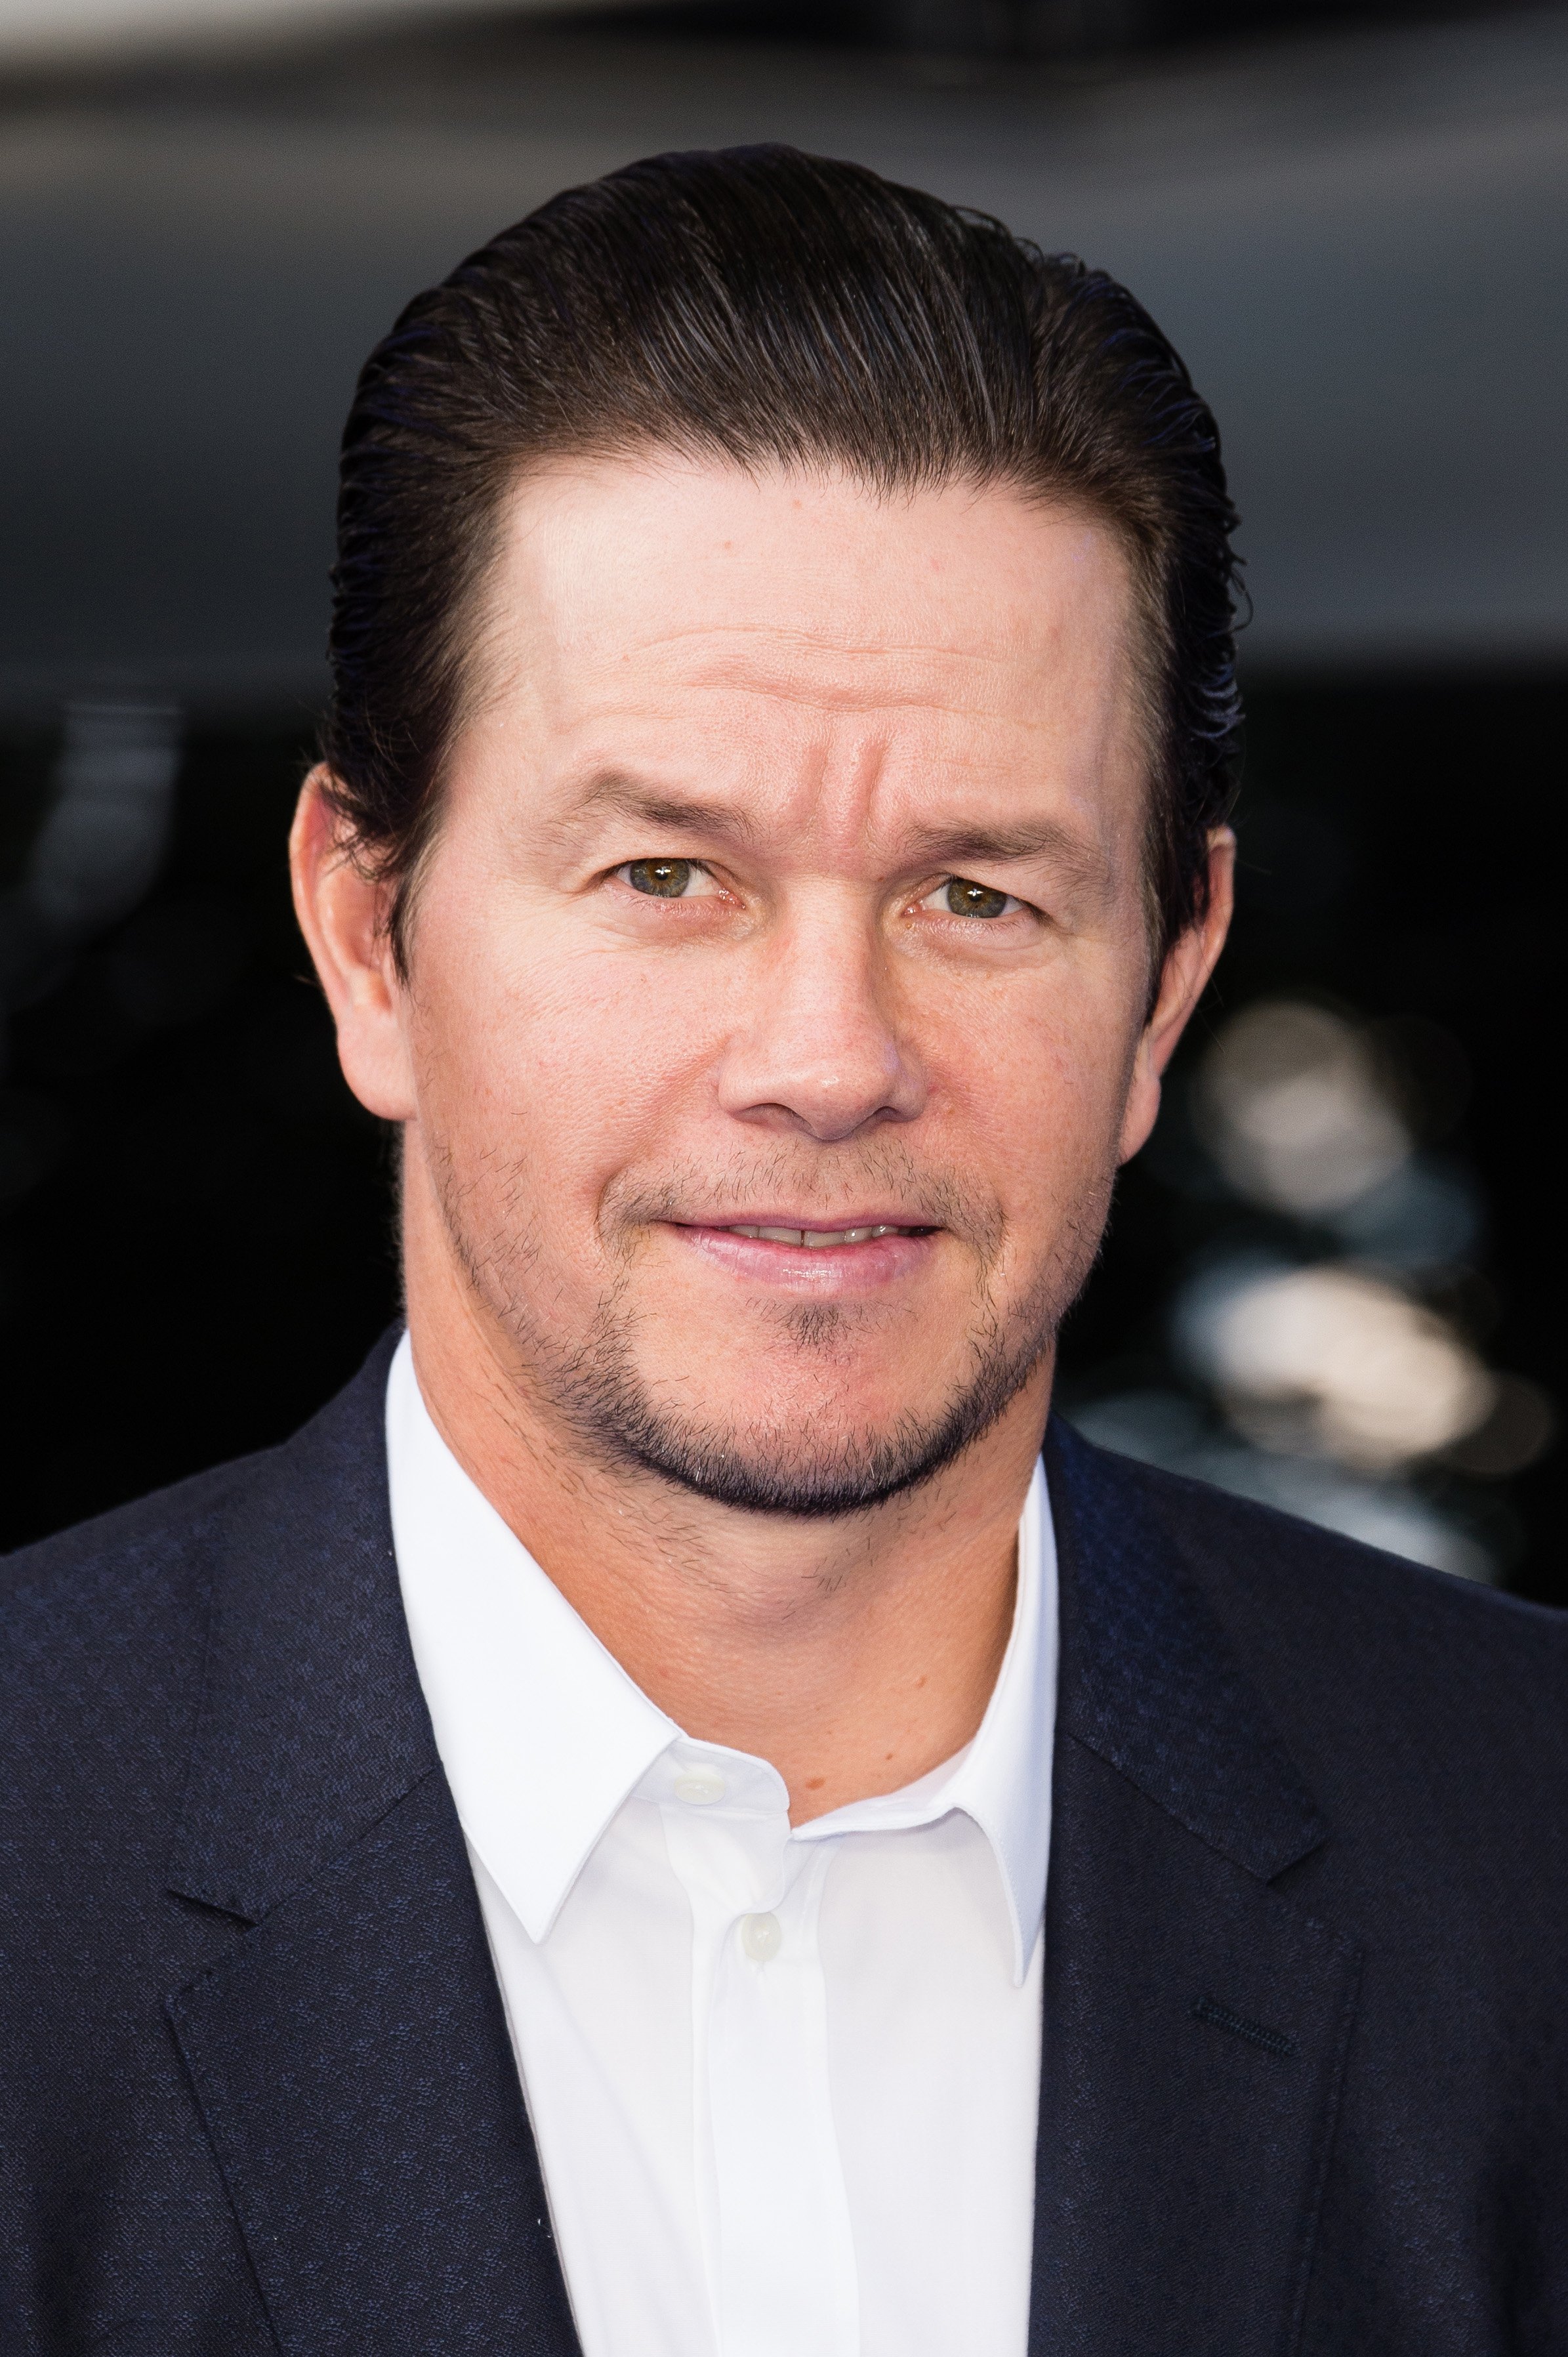 Mark Wahlberg attends the premiere of "Transformer: The Last Knight" in London, England on June 18, 2017 | Photo: Getty Images